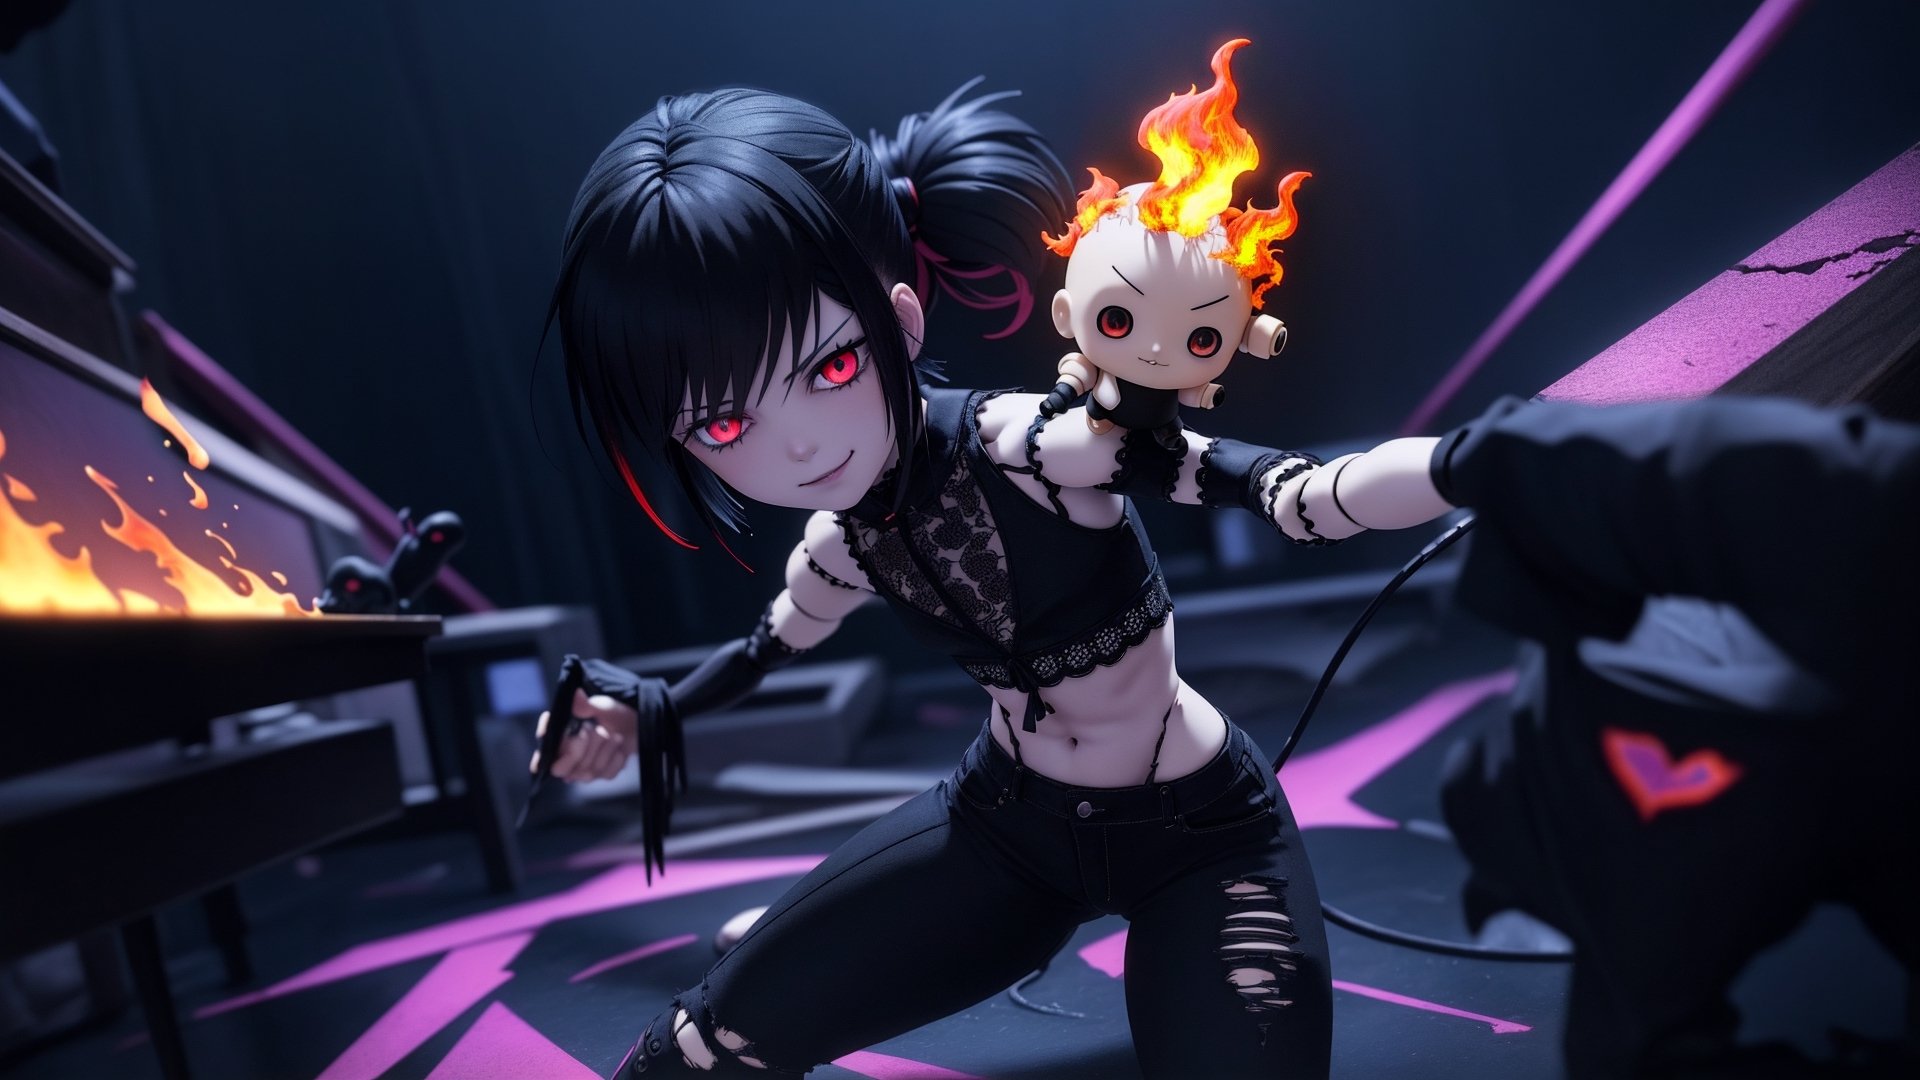 a dirty_demon anime doll,mohawk_hairstyle black-bangs shaved_sides,glaring fire-opal-eyes,slim-body,curvy hips,1wing black,tattered-torn-punk-clothing,smirk,real-doll-style, doll-joints,80's-style glamour-shot,realistic photograph, source lighting, rim lighting, radial lighting,color-boost,intricate, ornate, elegant and refined,glowing-blacklight-illumination,3D,Action figure,Action Figure,Anime,Doll,Fashion